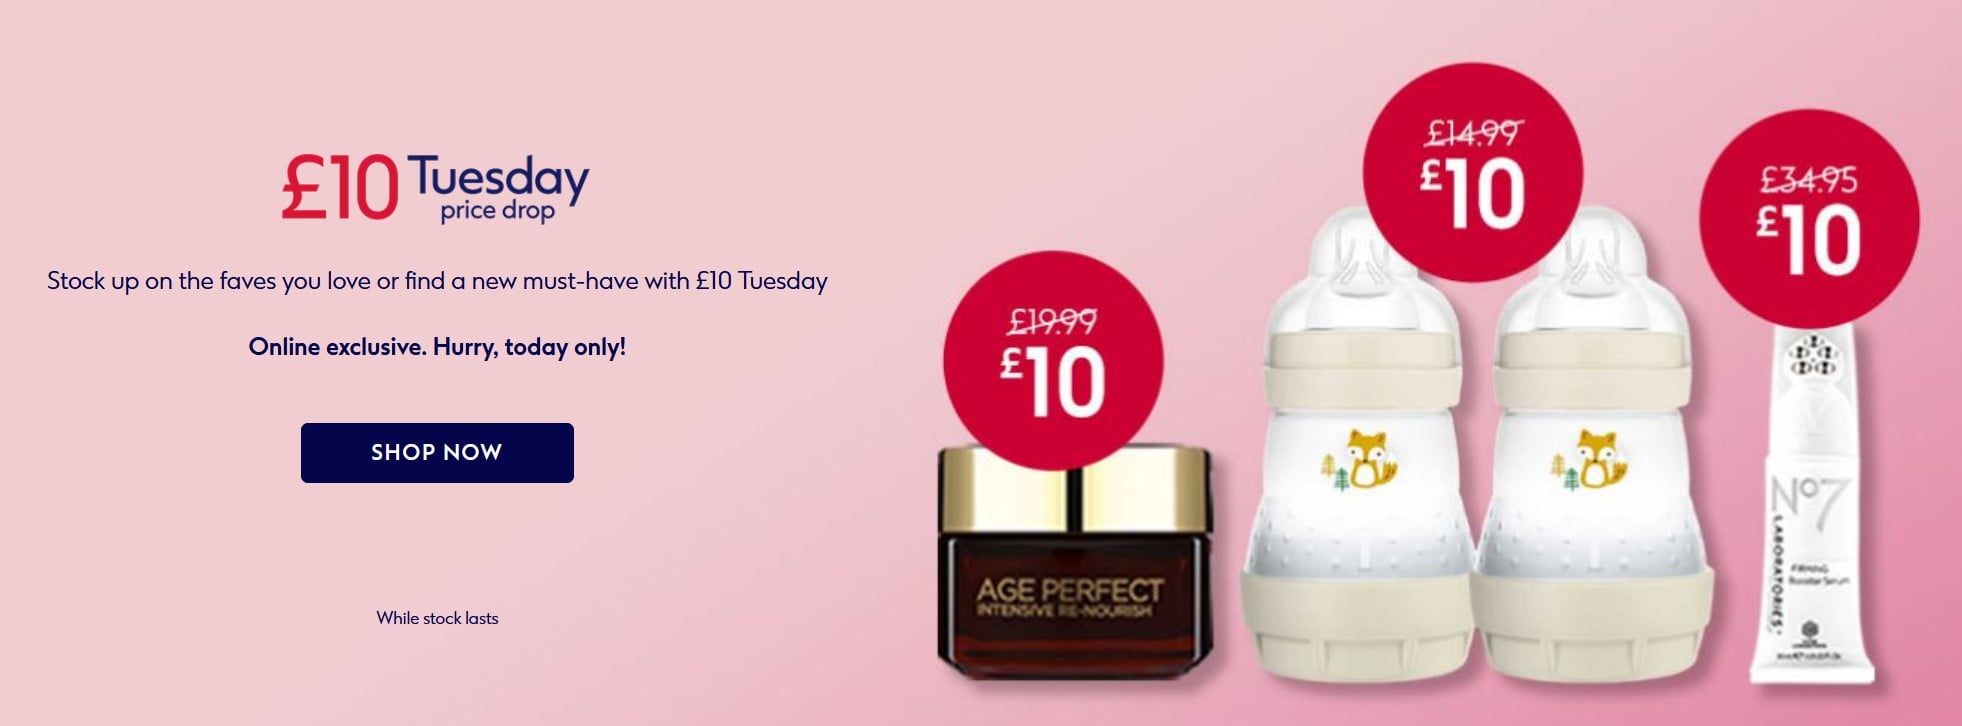 £10 Tuesday at boots